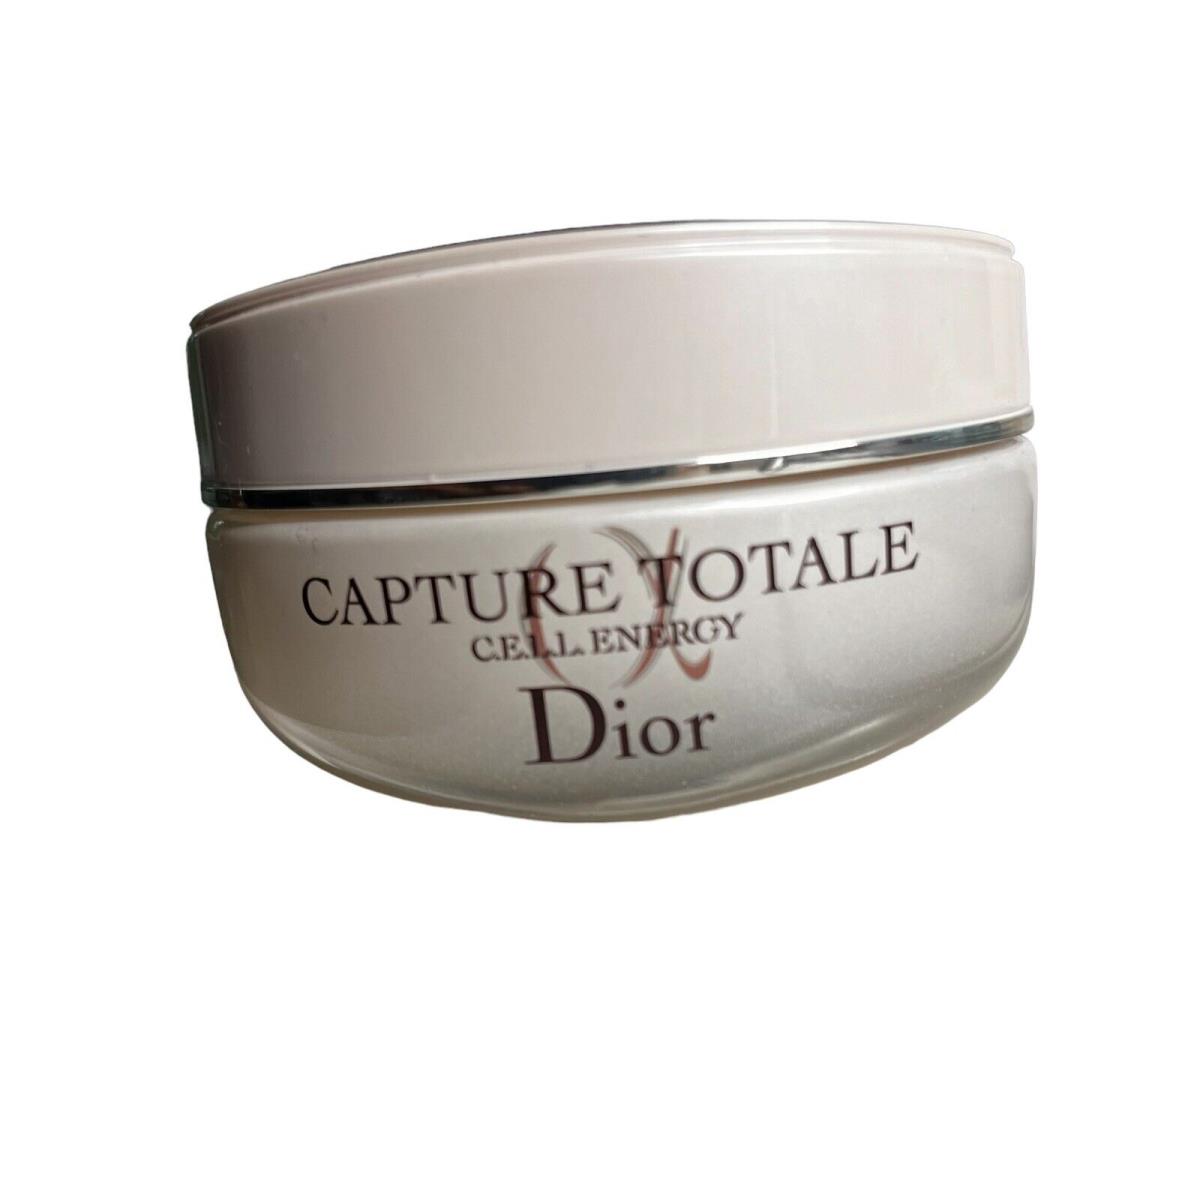 Dior Capture Totale Cell Energy Firming/wrinkle Correcting Creme 1.7oz